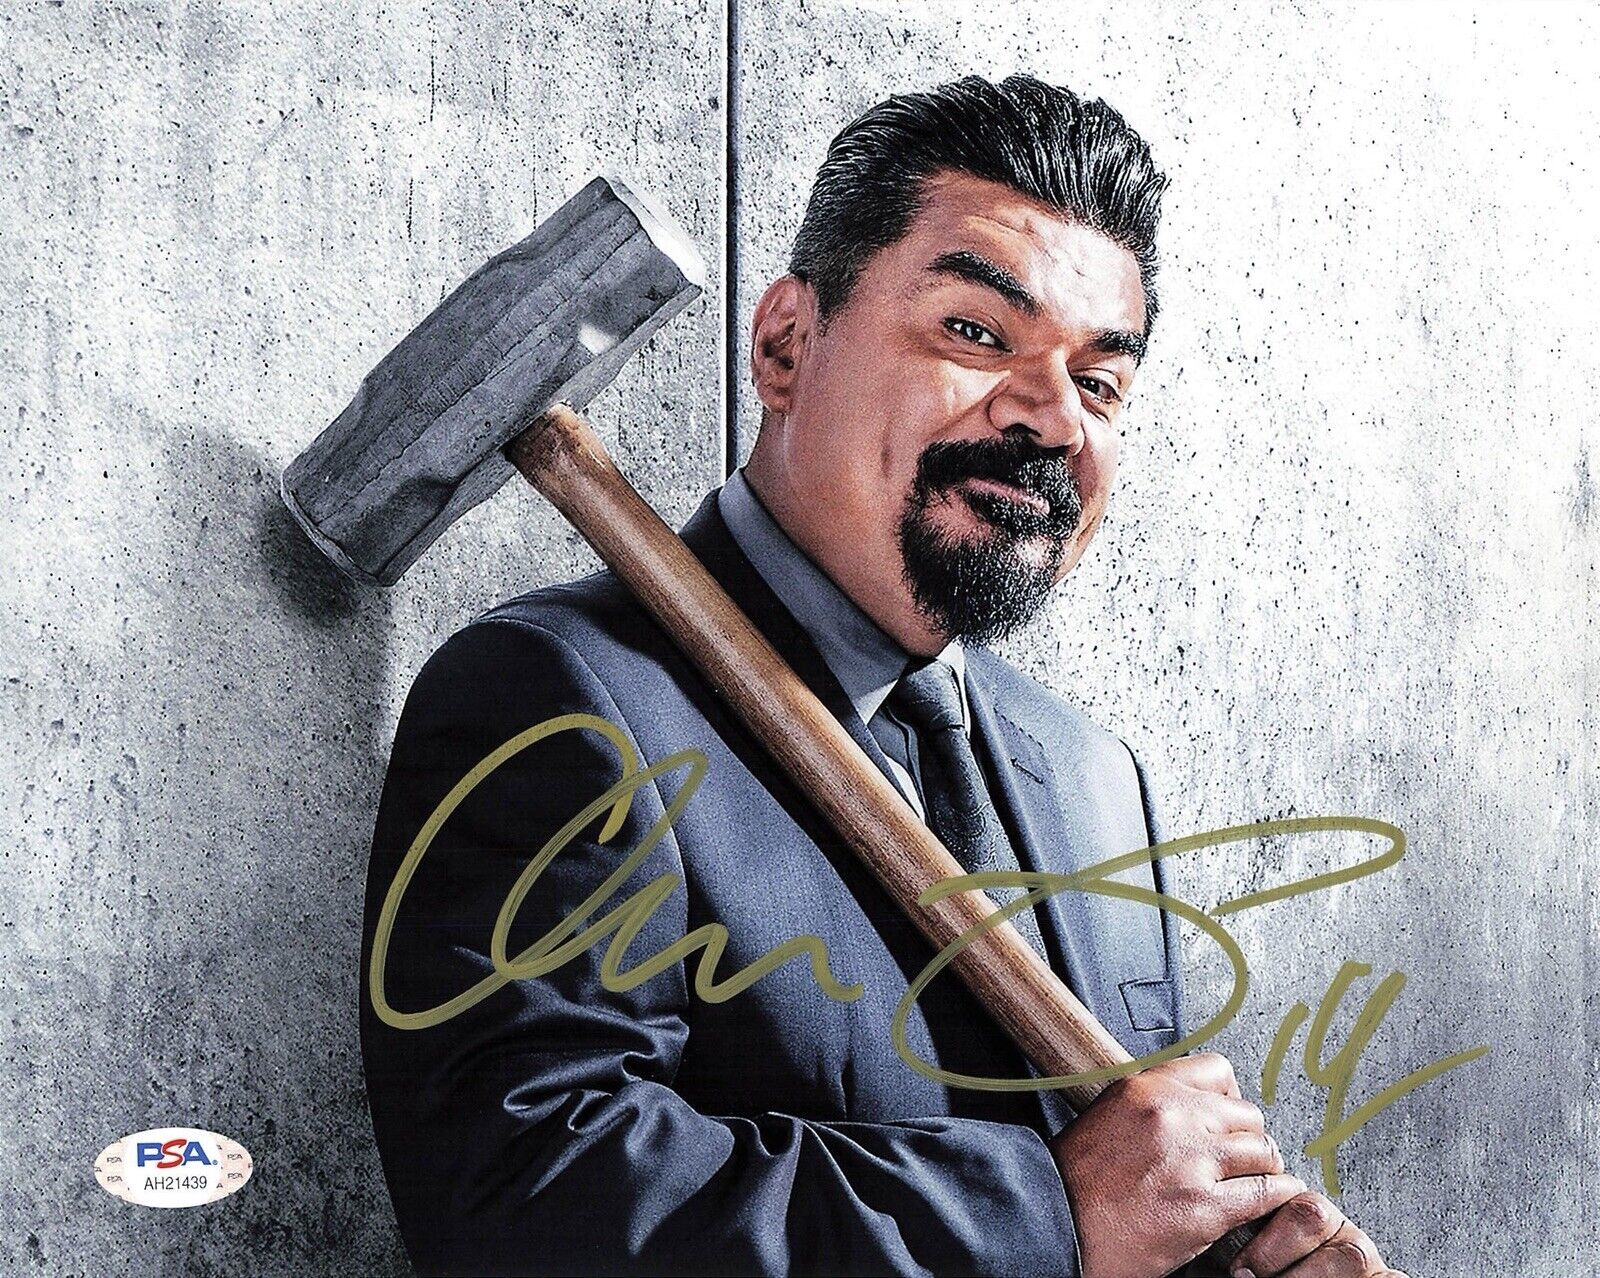 george lopez Signed Autographed 12x8 Photo Poster painting Pic Smurfs Psa Coa